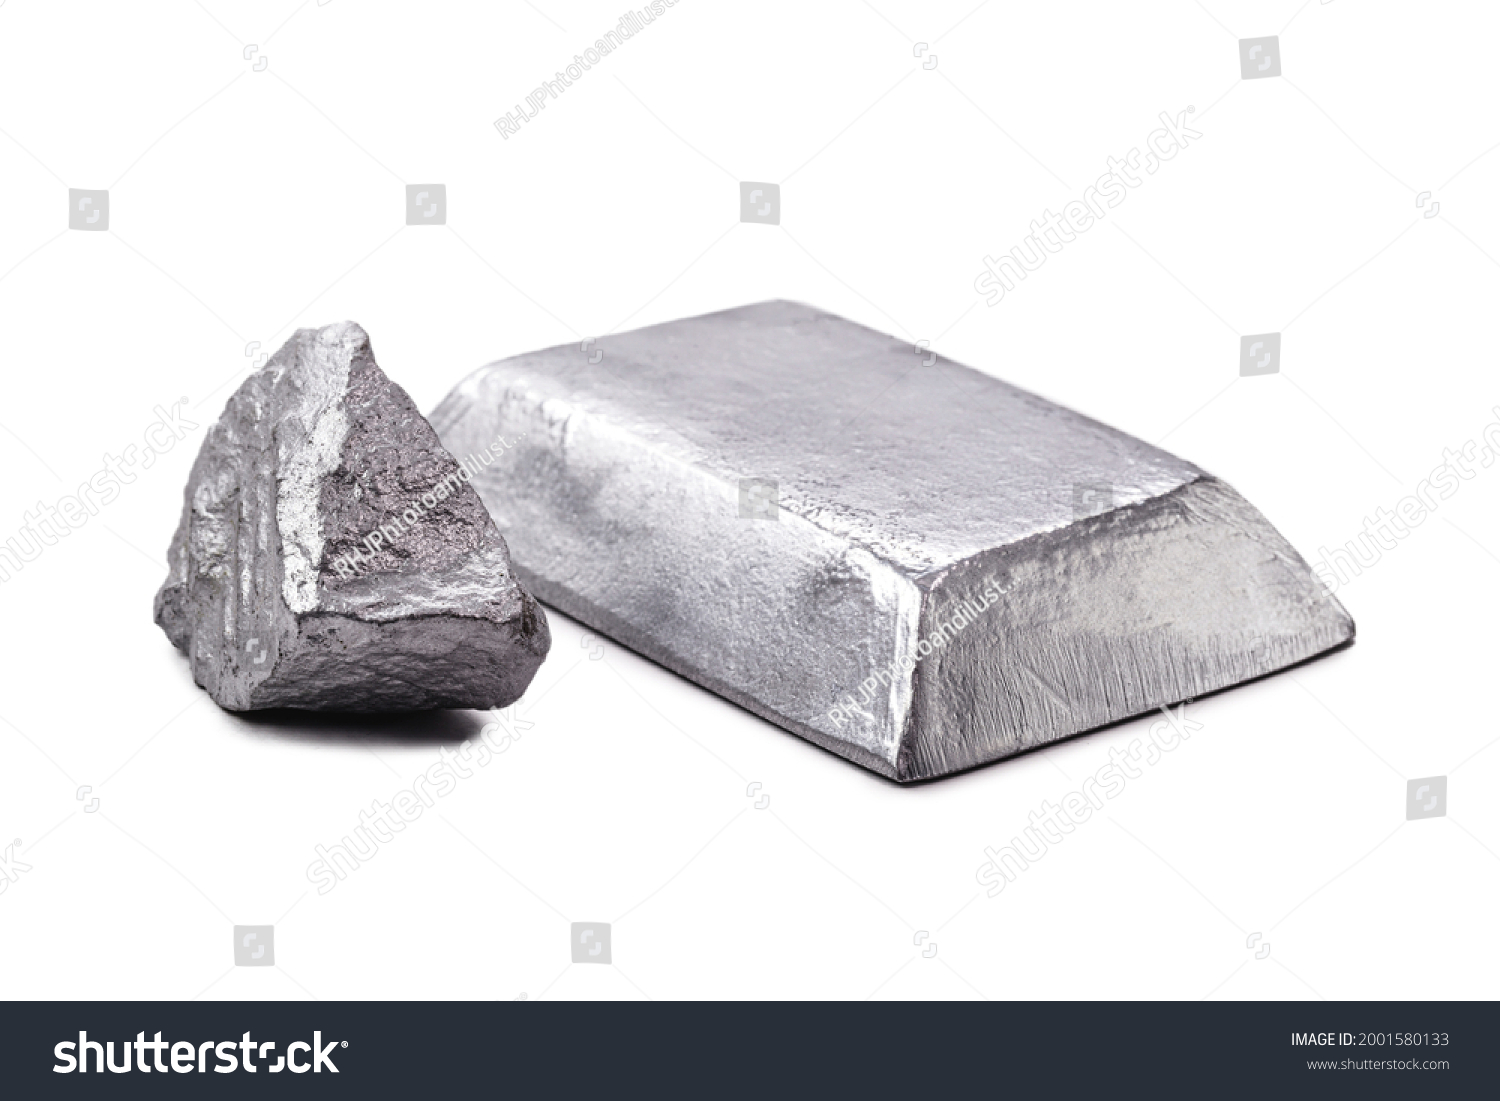 Isolated zinc ingot or bar next to raw zinc nugget on isolated white background, metal used in alloy and steel production. #2001580133